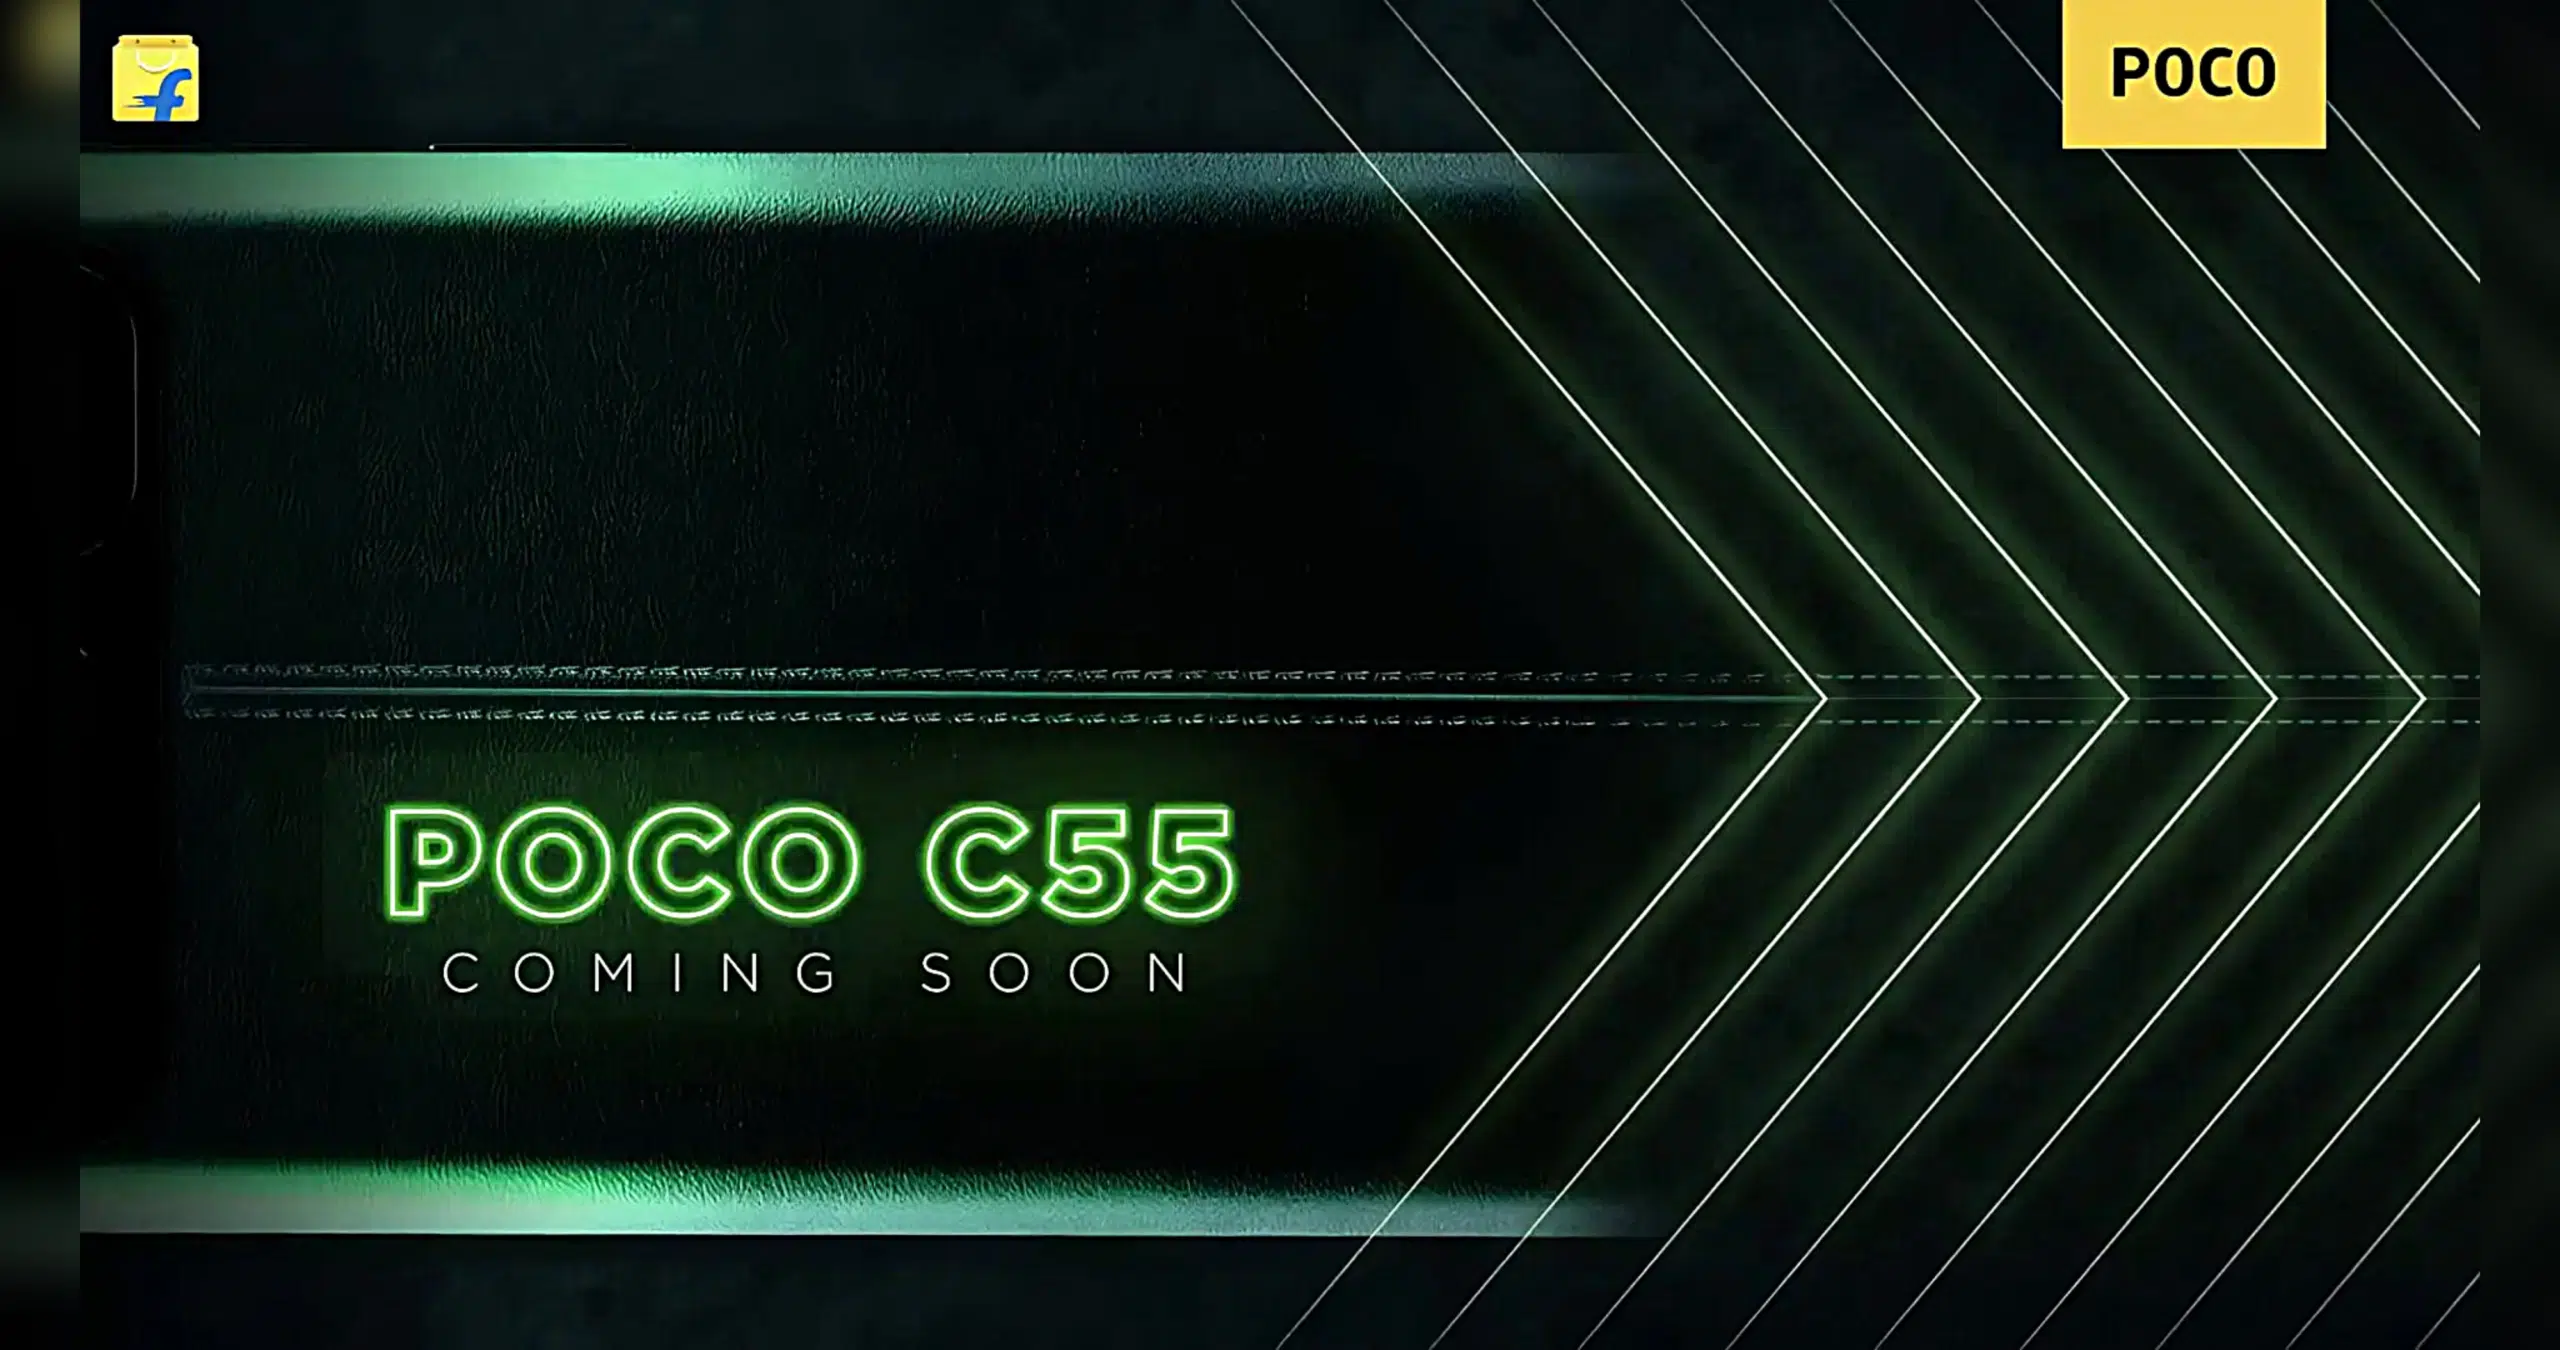 POCO C55 India launch is Officially confirmed